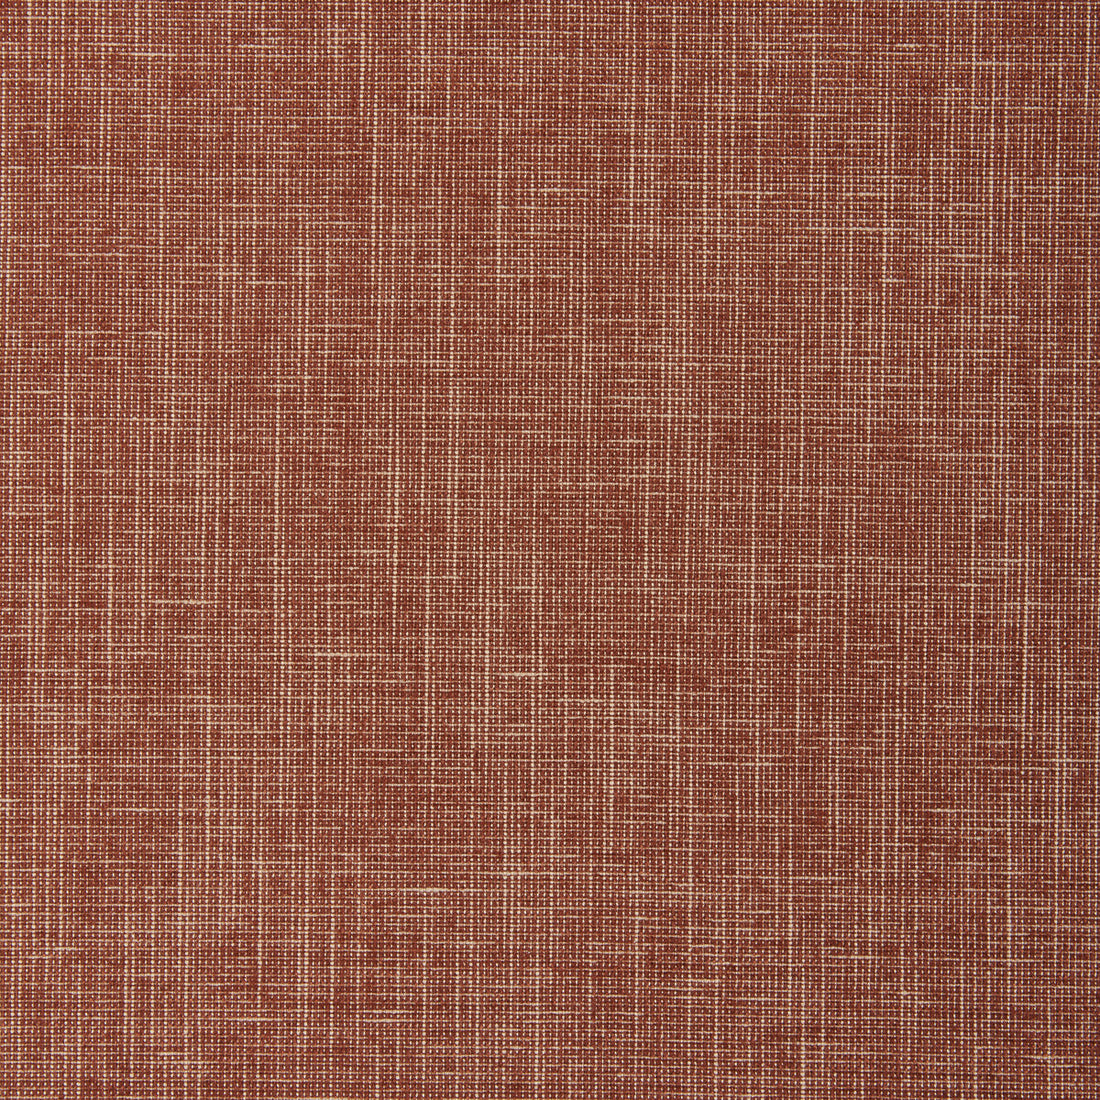 Kravet Smart fabric in 37078-24 color - pattern 37078.24.0 - by Kravet Smart in the Trio Textures collection